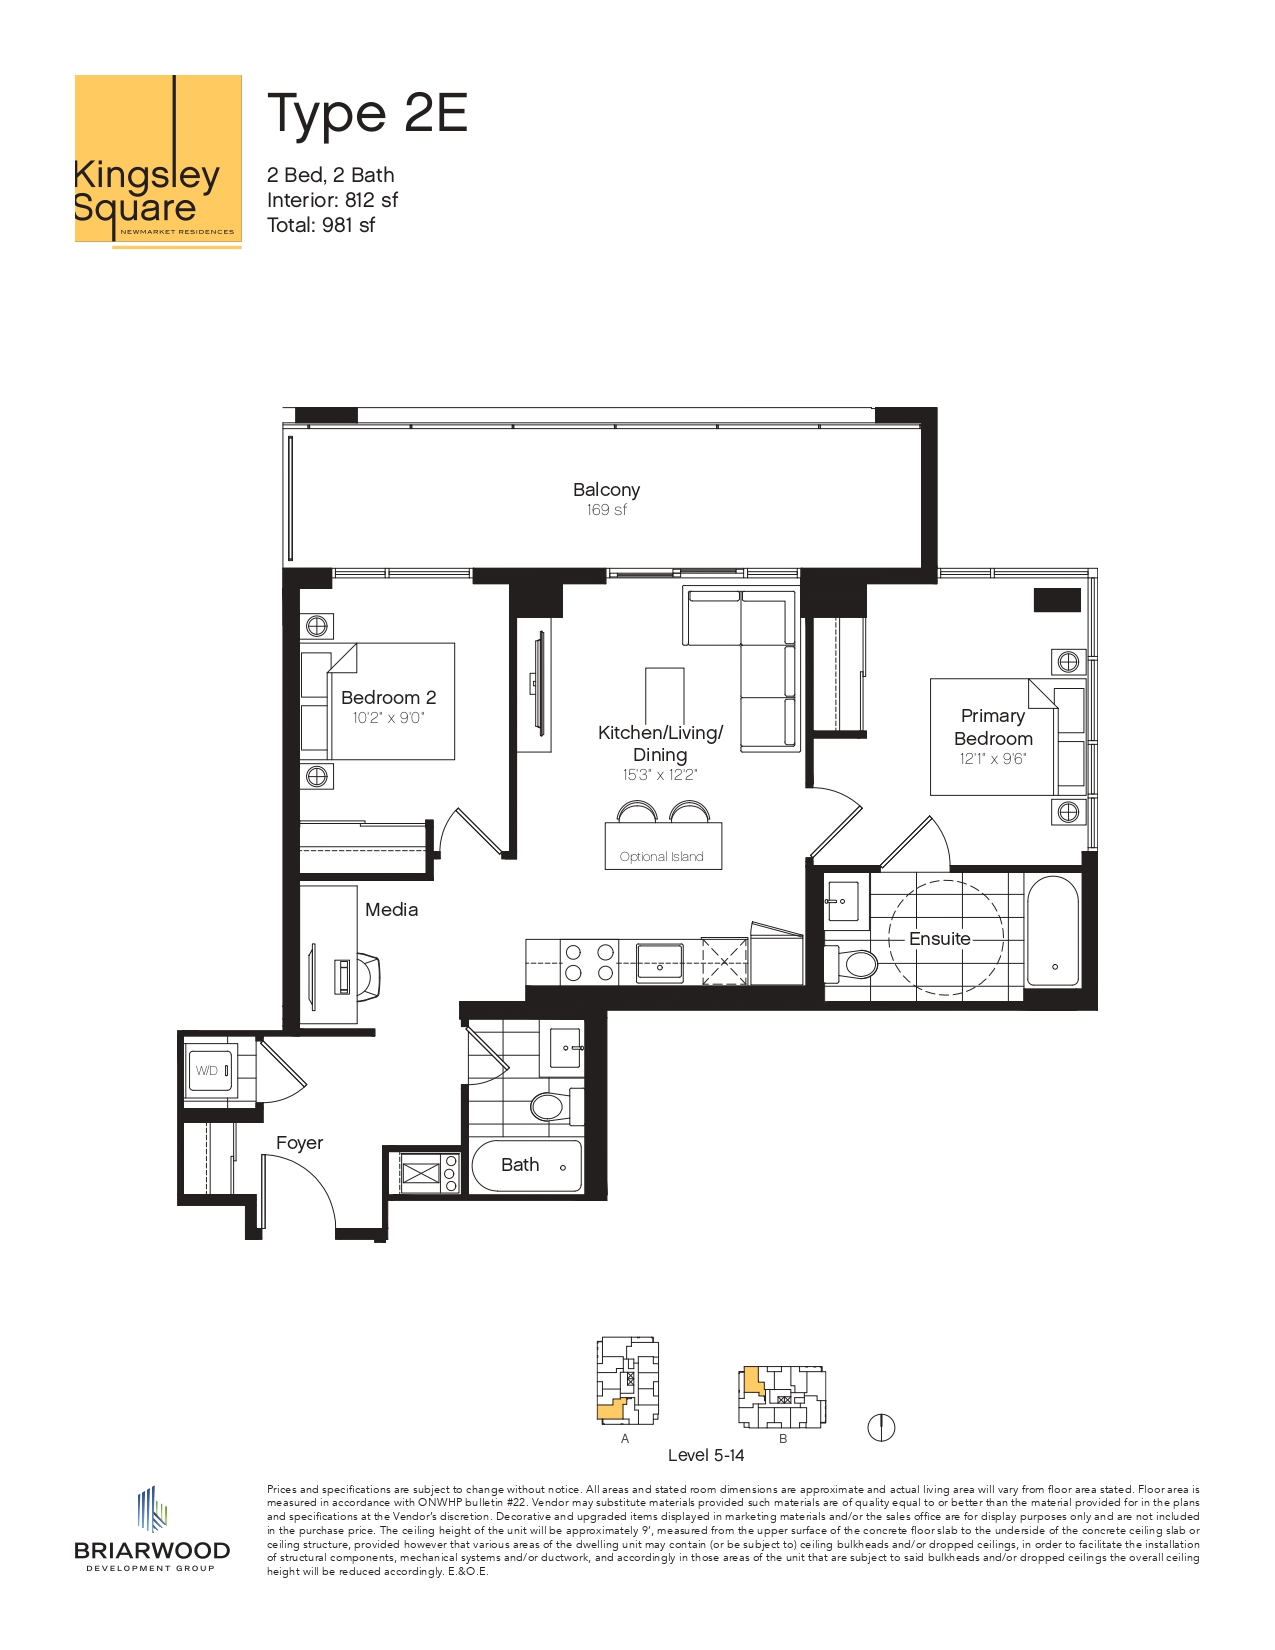 2E Floor Plan of Kingsley Square Condos with undefined beds